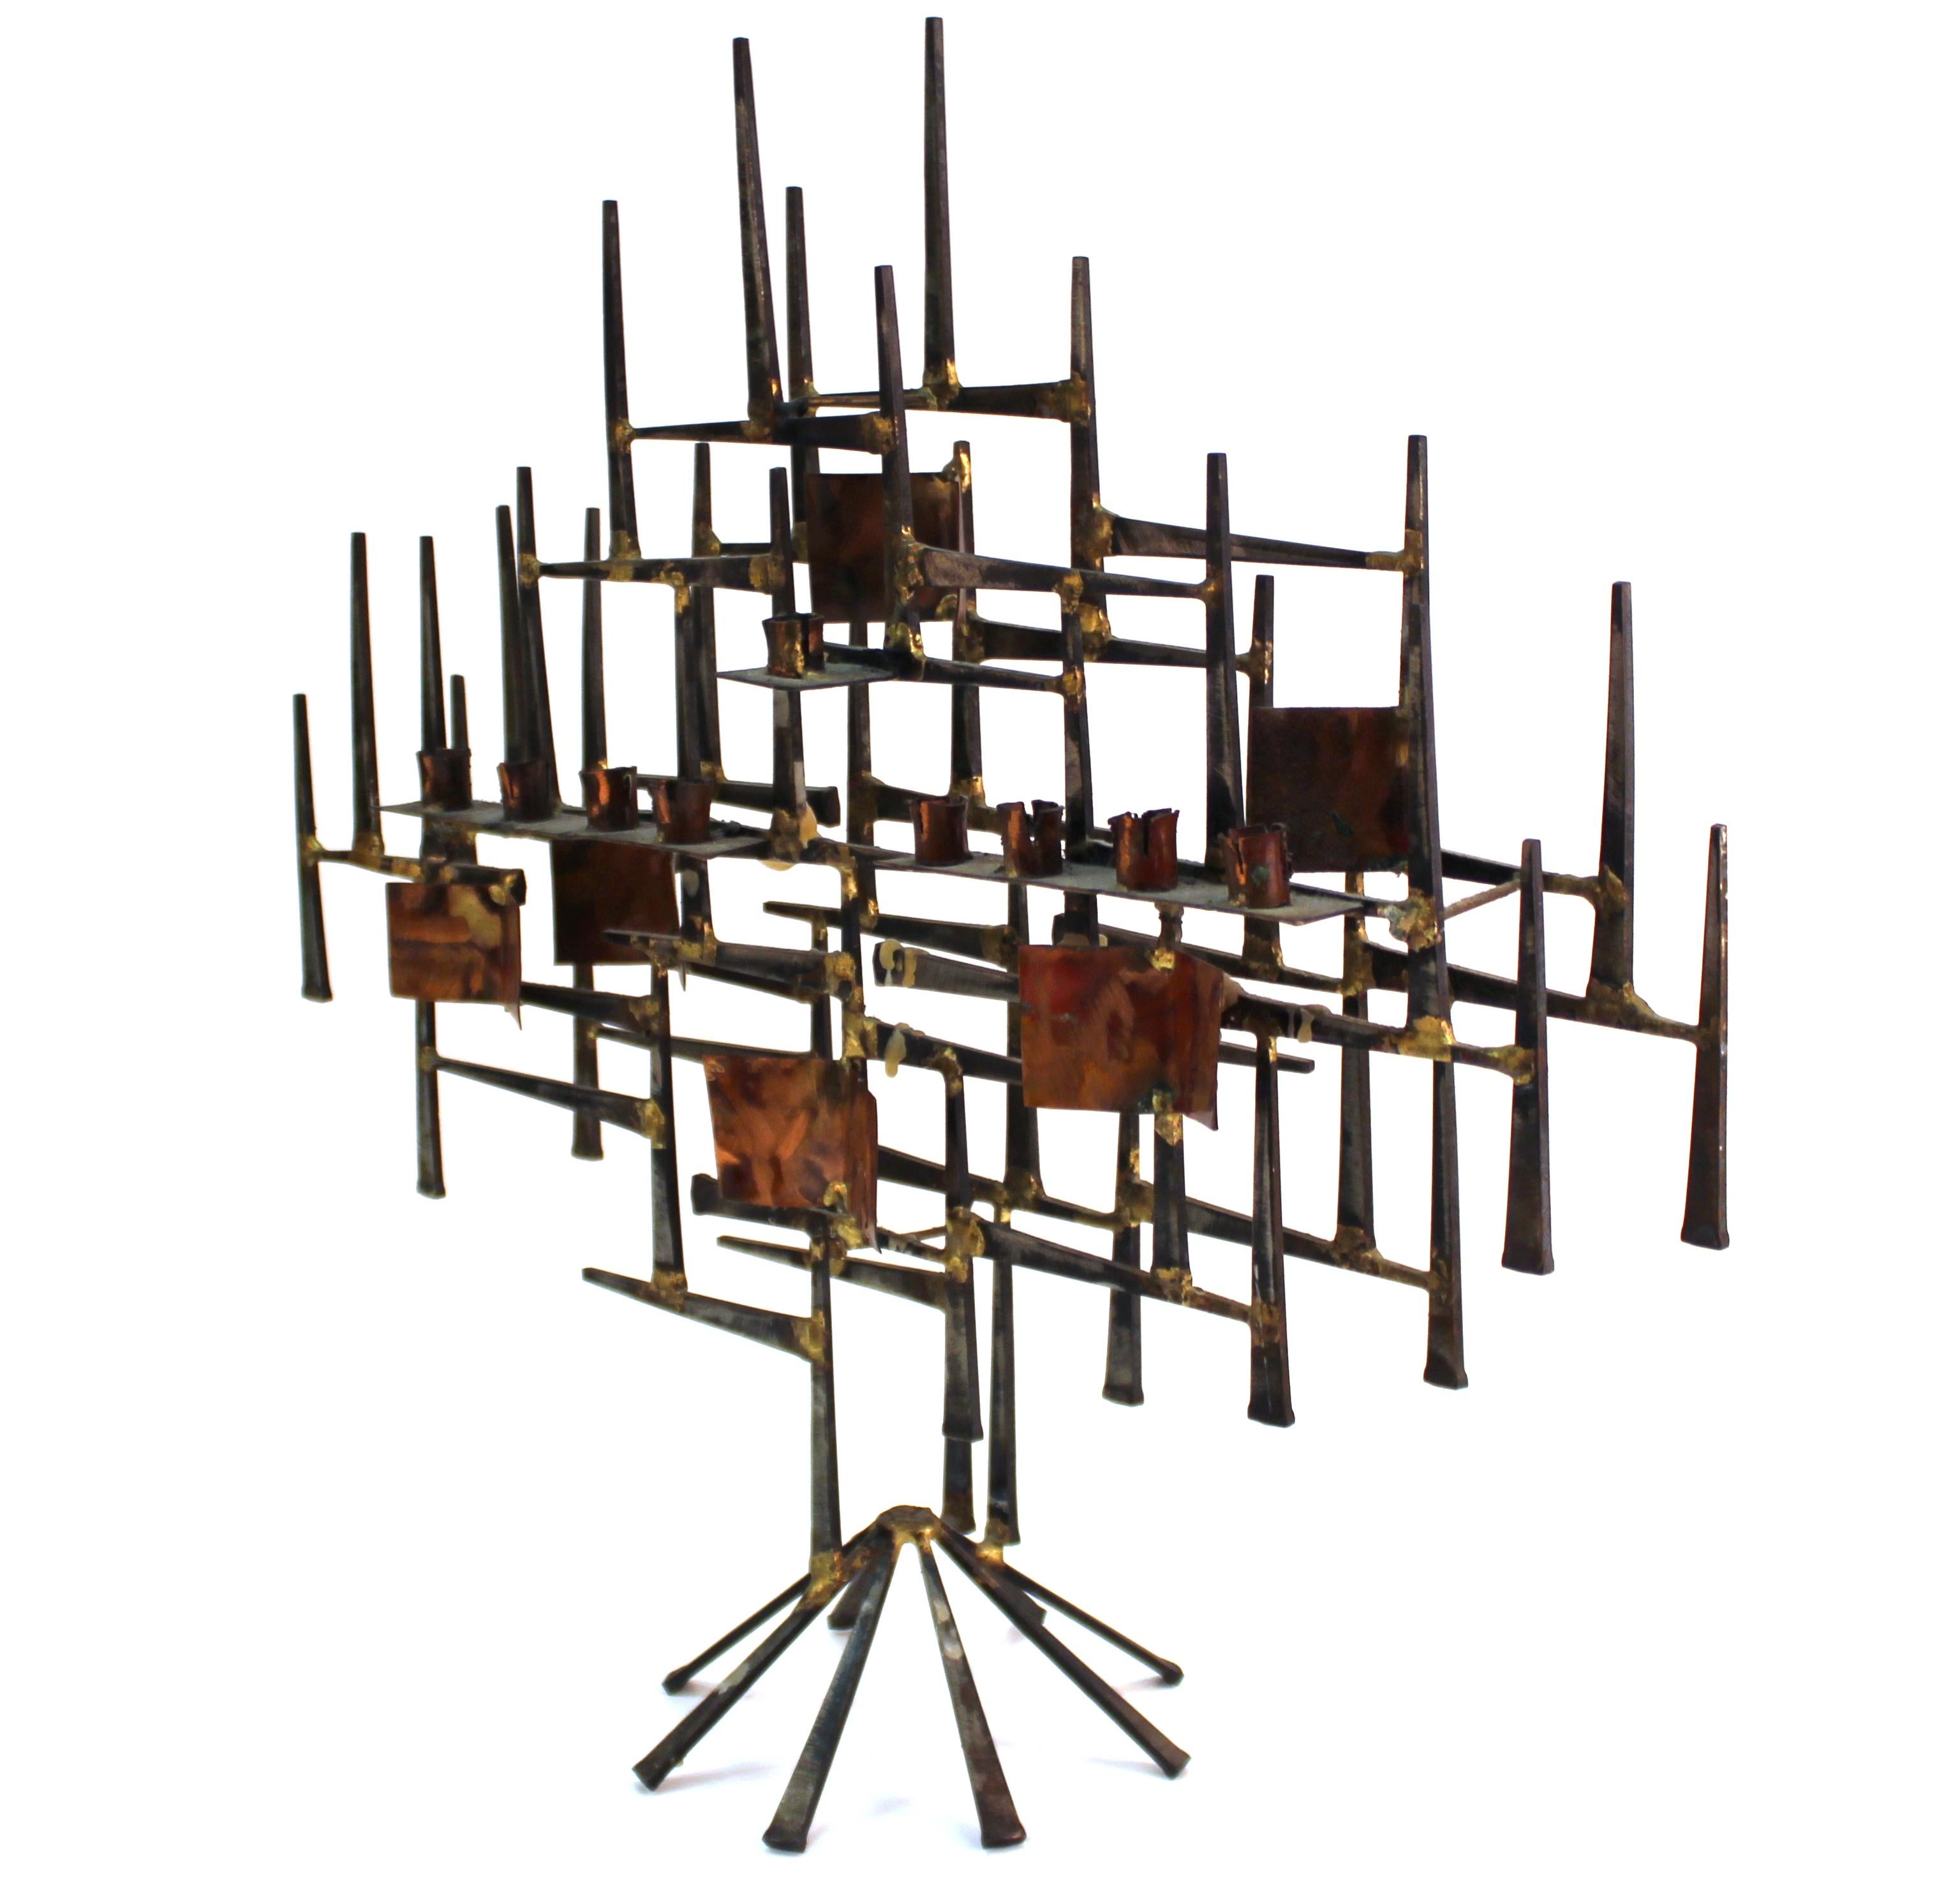 Modern Brutalist period Judaica menorah made in welded metal nails. The piece was likely made during the 1970s-1980s and is in great vintage condition with age-appropriate wear and use.